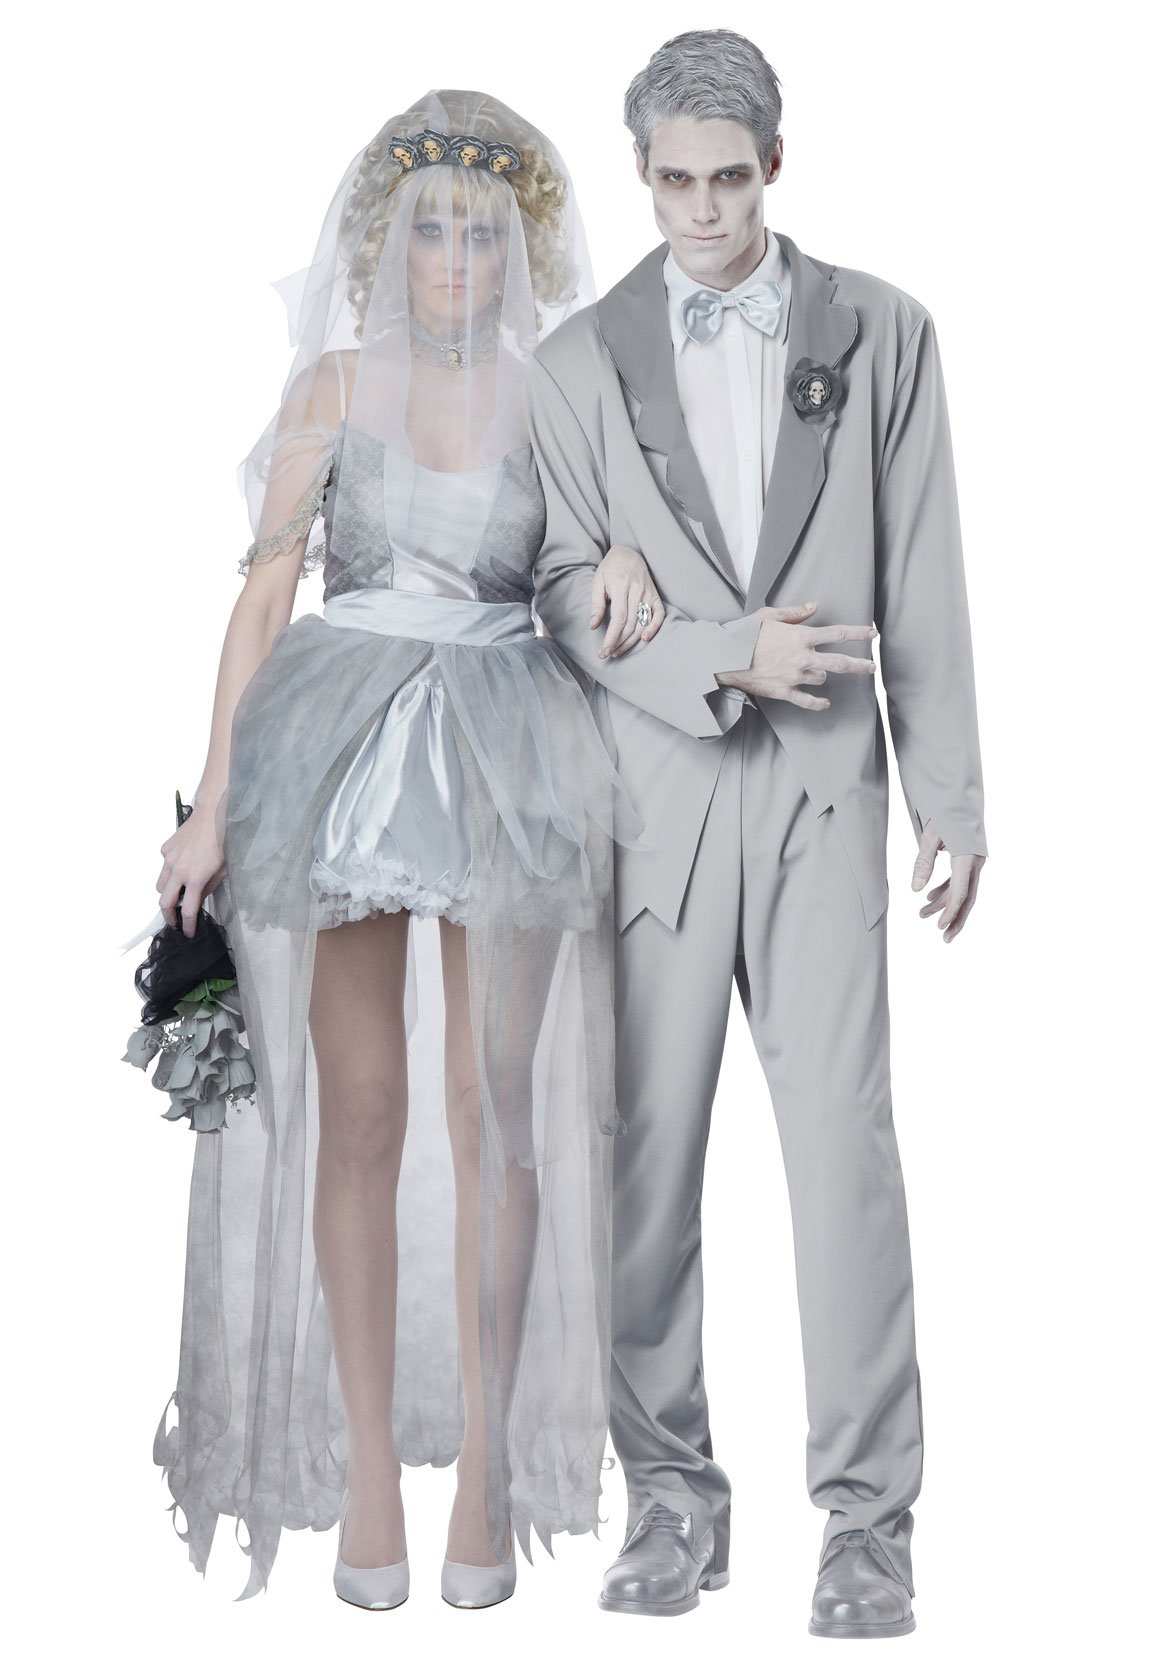 California Costumes Collections 01288 Adult Ghostly Groom | eBay